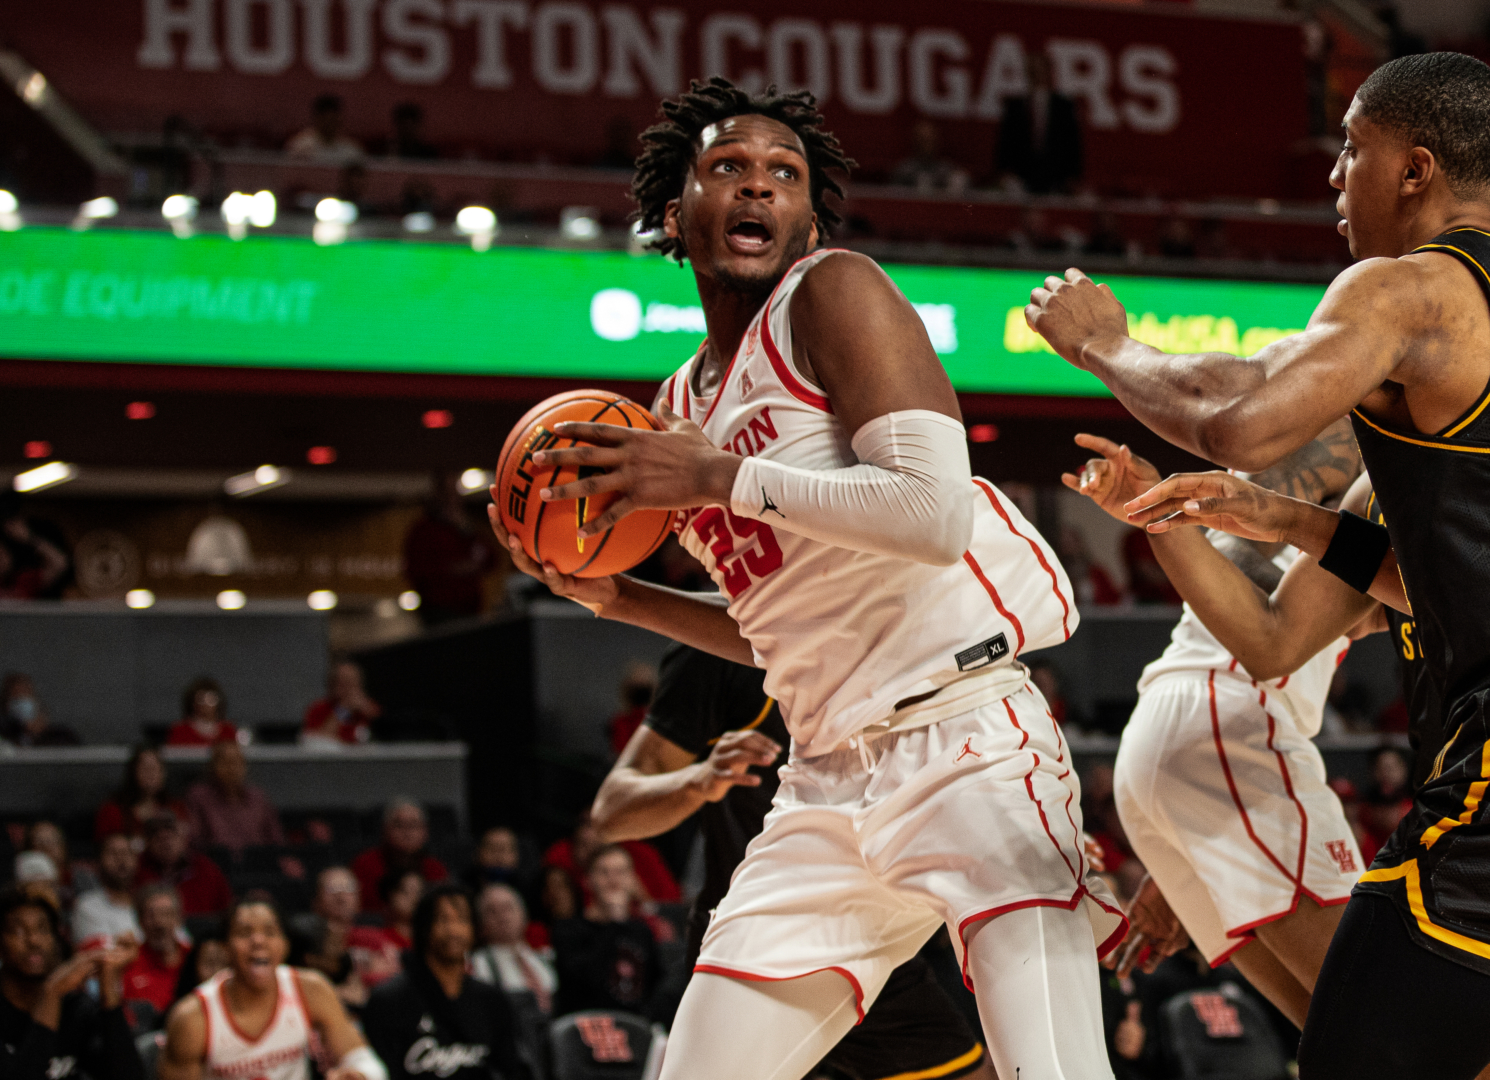 Graduate forward Josh Carlton's double-double led the way for the Cougars against UCF. | Sean Thomas/The Cougar